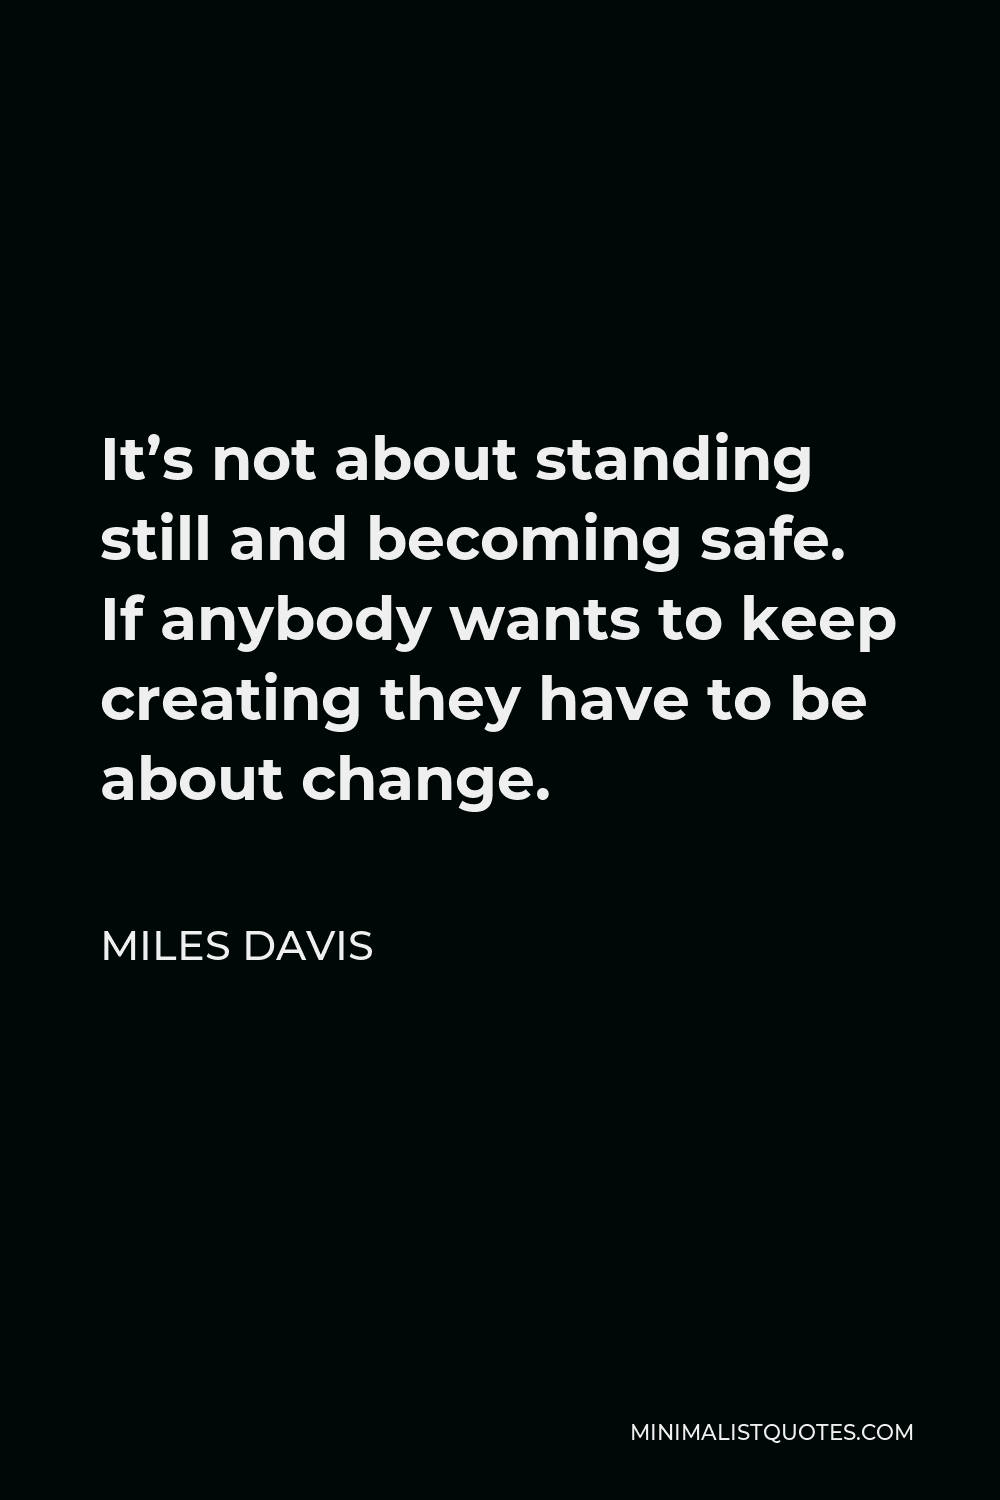 Miles Davis Quote - It’s not about standing still and becoming safe. If anybody wants to keep creating they have to be about change.